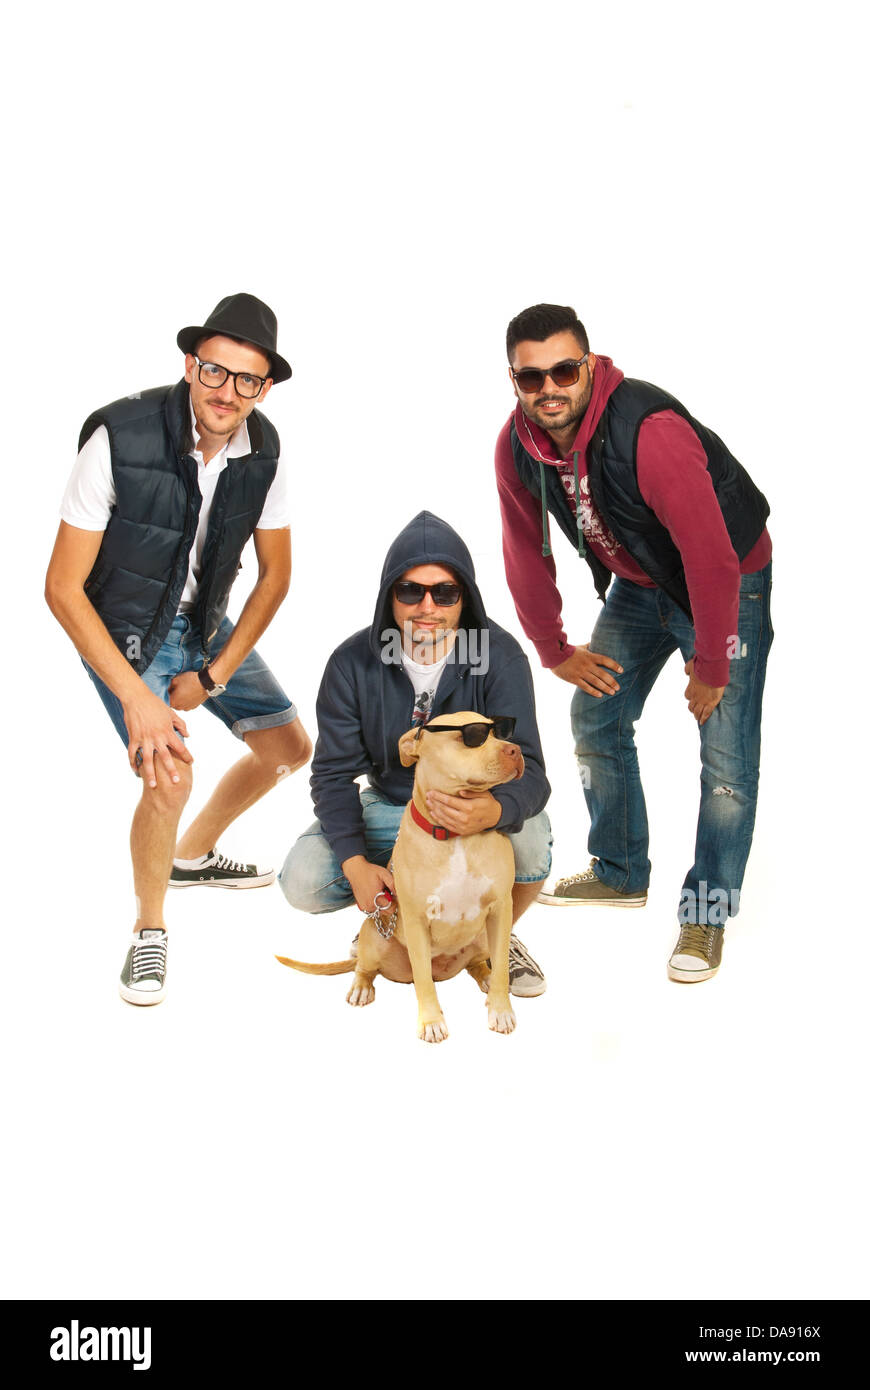 rappers band with pitbull dog with sunglasses isolated on white background Stock Photo